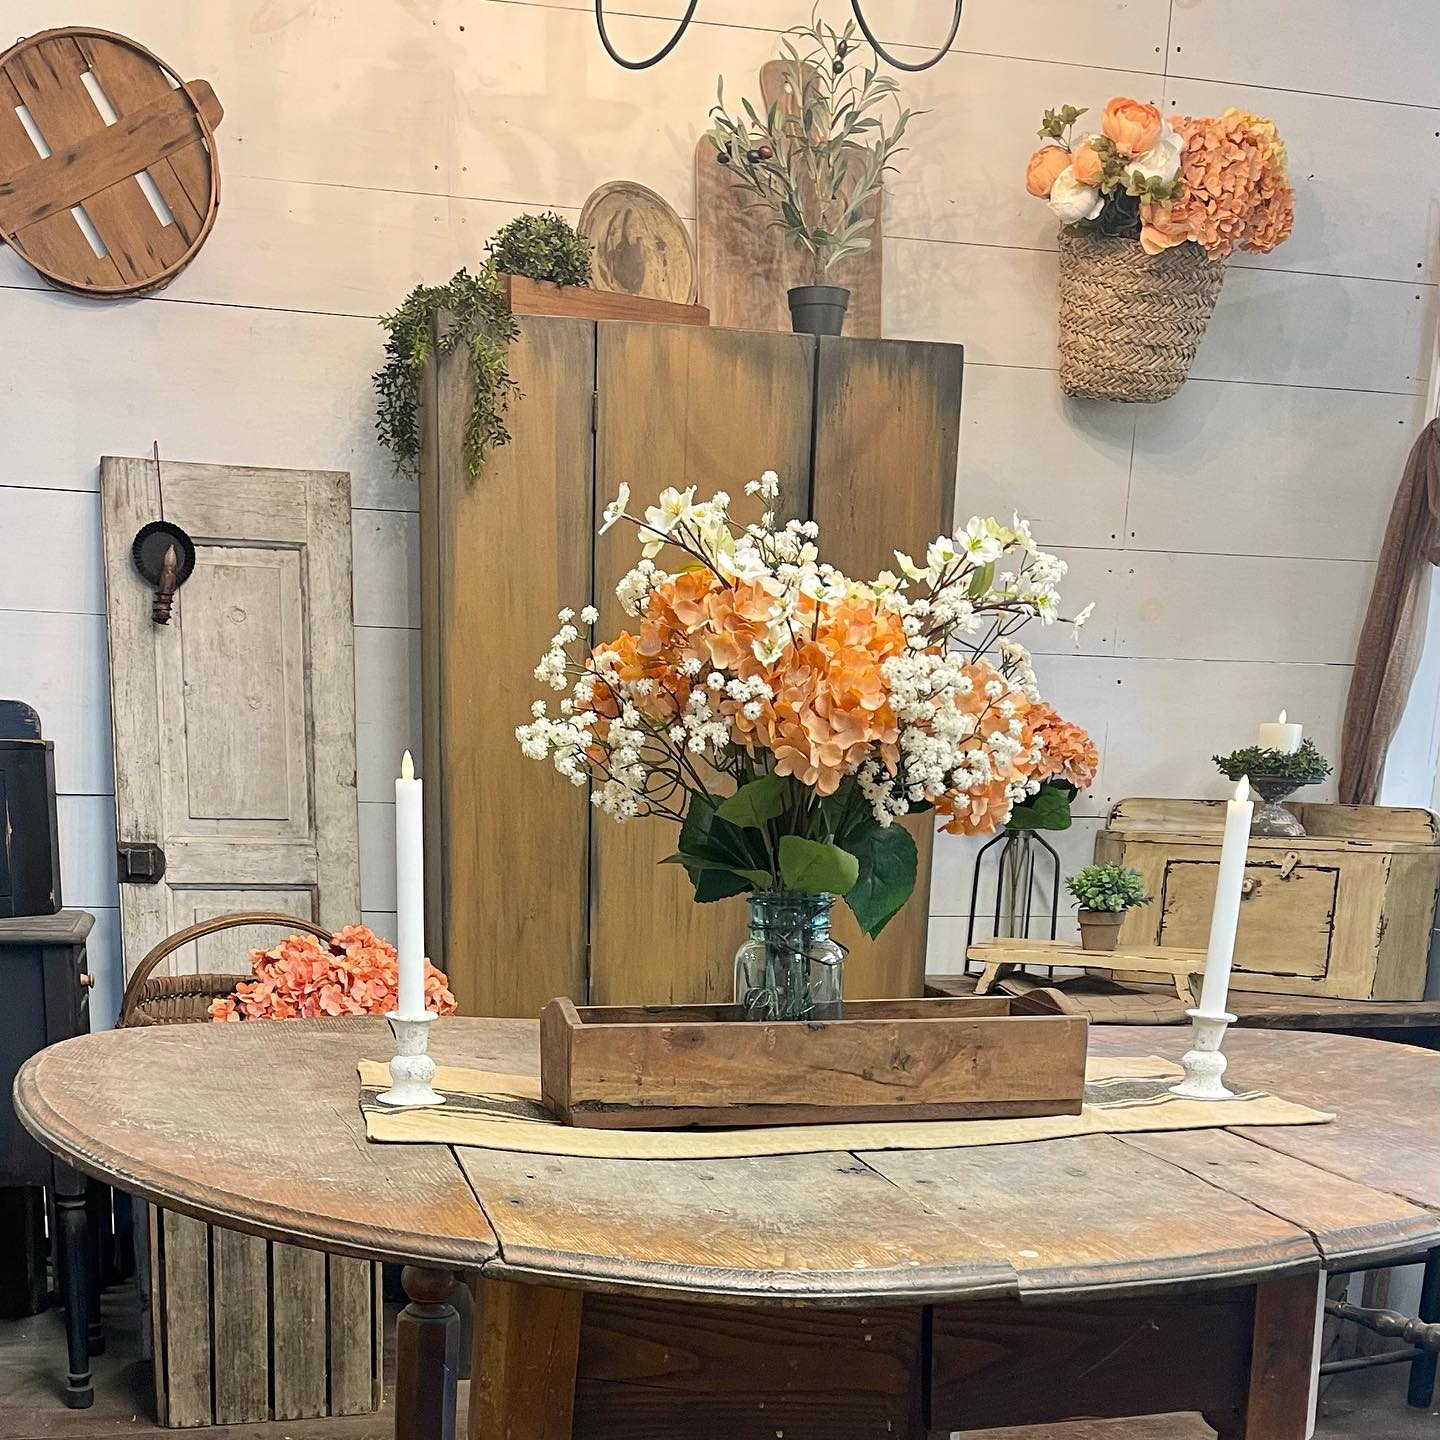 a wooden table styled with a centerpiece made of a wooden tray holding a Peach and white colored flowers and two candles with candleholders